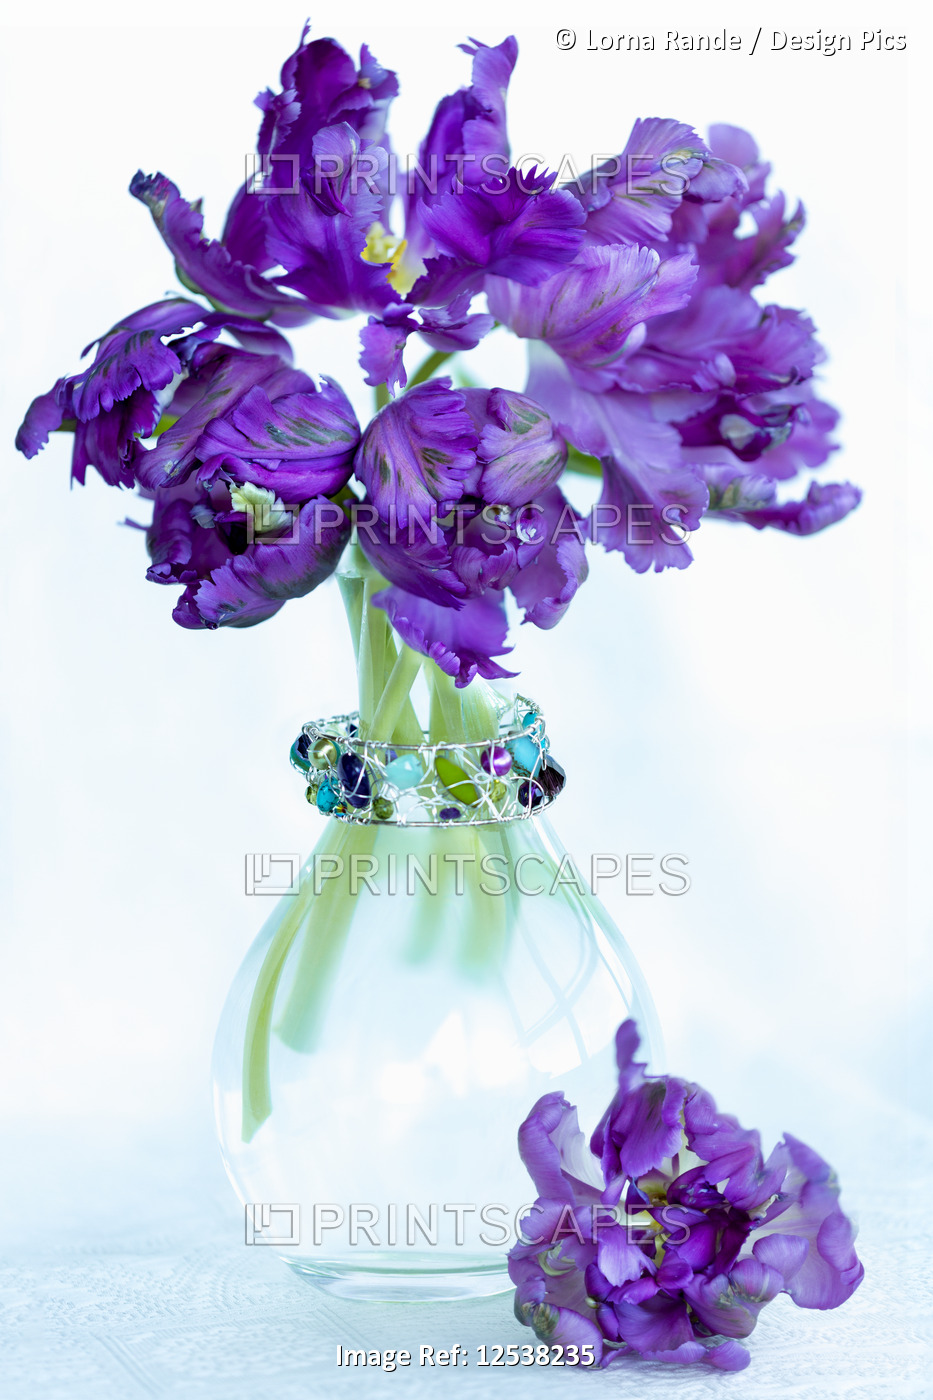 Purple tulips in a decorative vase against a white background